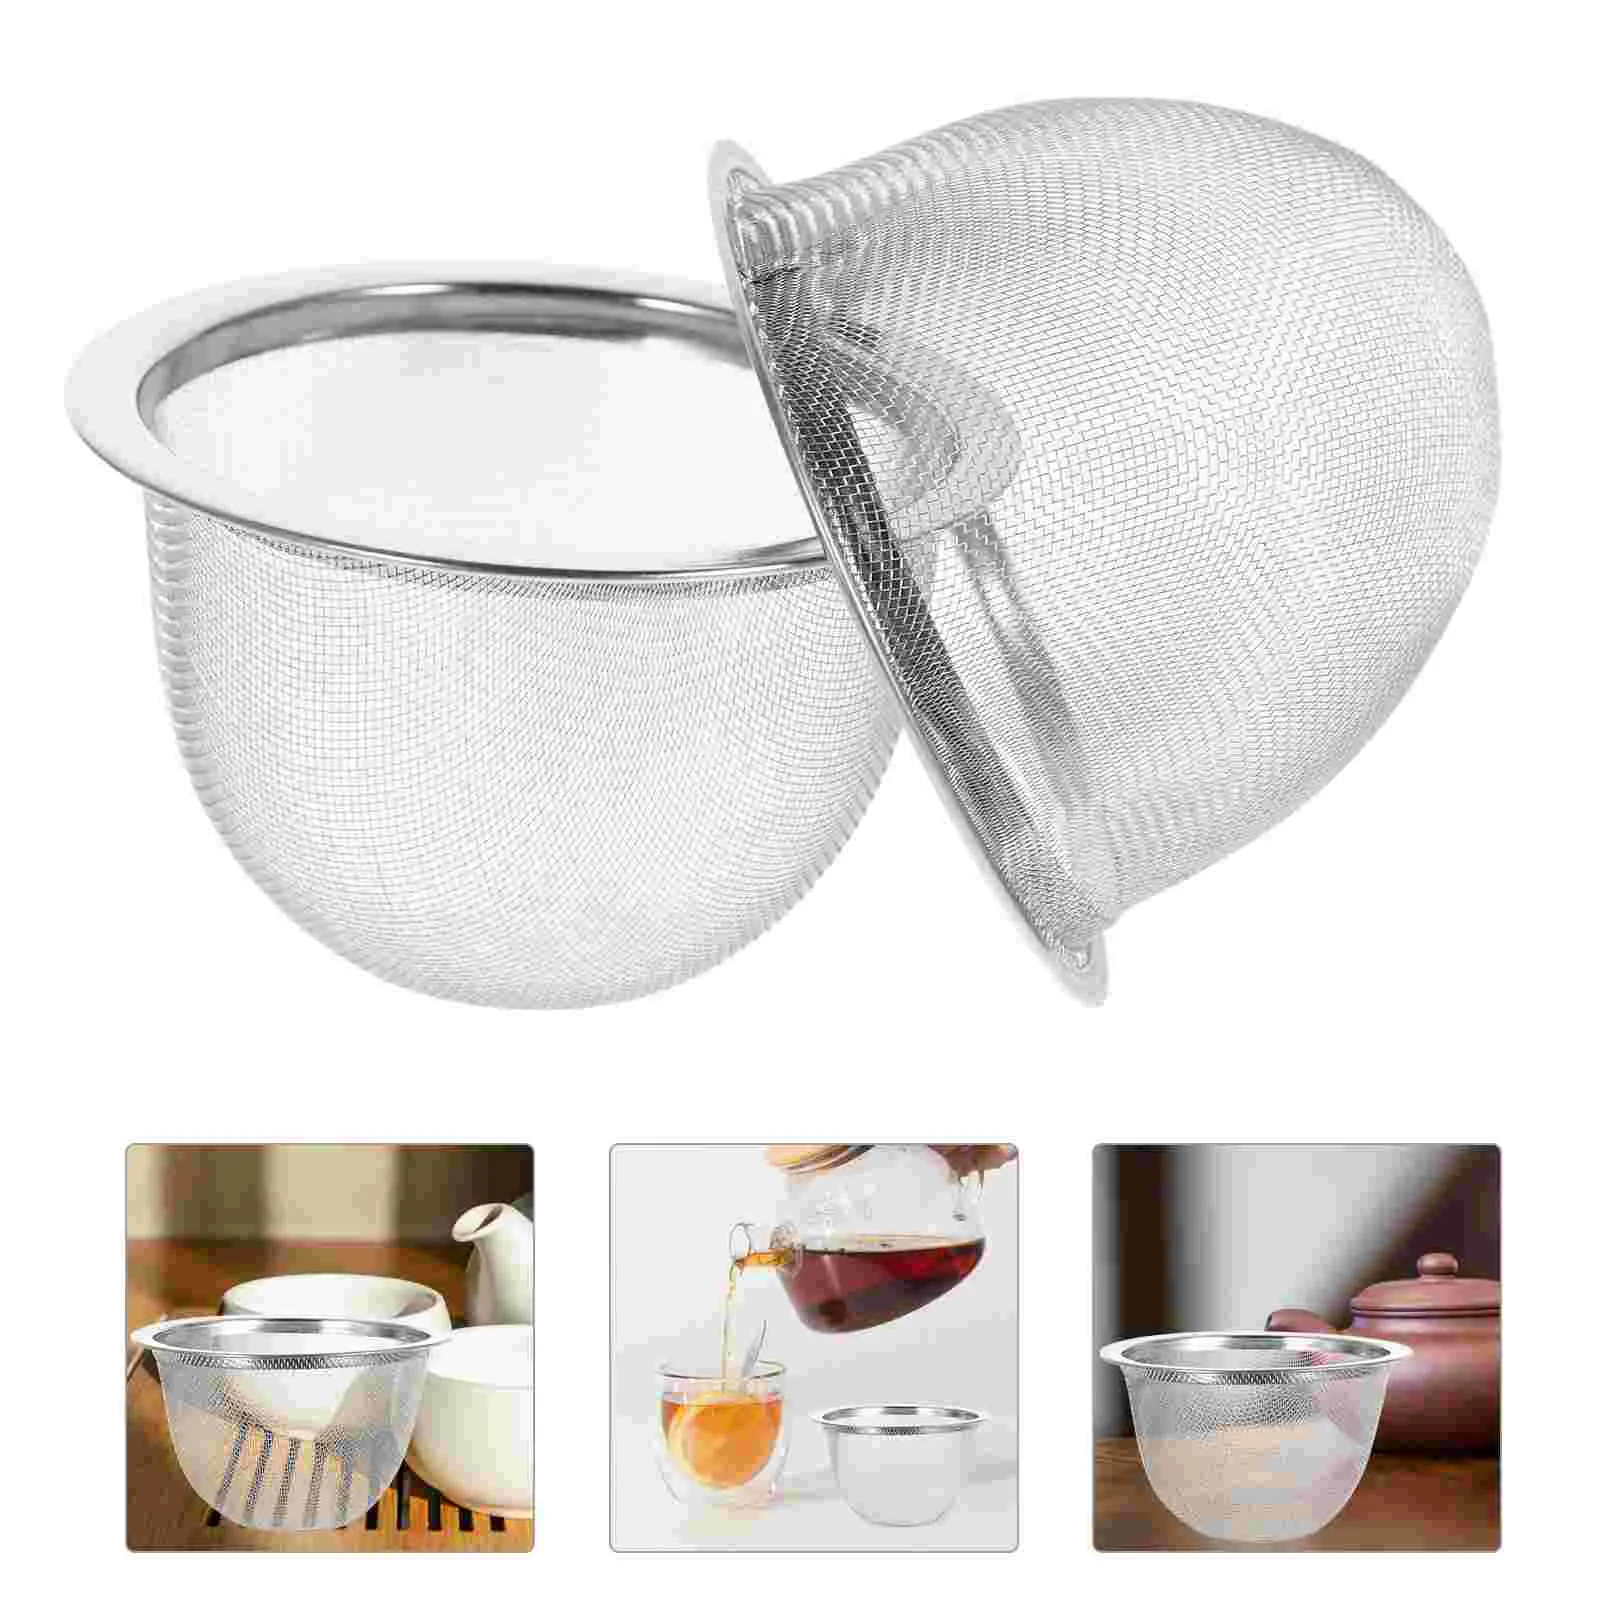 

Tea Strainer Infuser Mesh Loose Teapot Stainless Steel Filter Leaf Metal Replacement Steeper Insert Coffee Fine Pot Filters